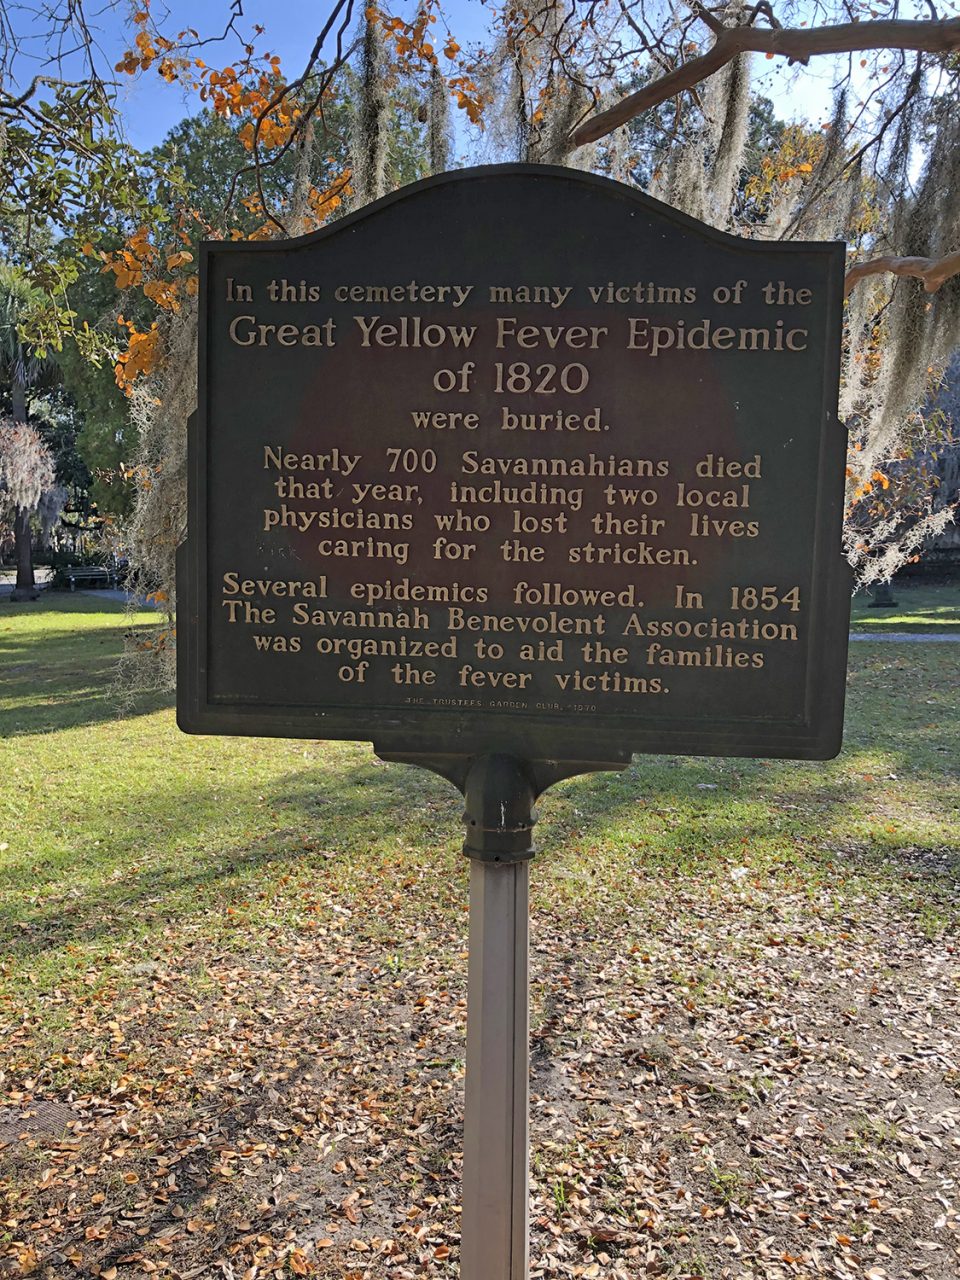 Savannah's Colonial Cemetery -- historical marker acknowledging the Great Yellow Fever Epidemic of 1820, in which nearly 700 people were buried in a mass grave.